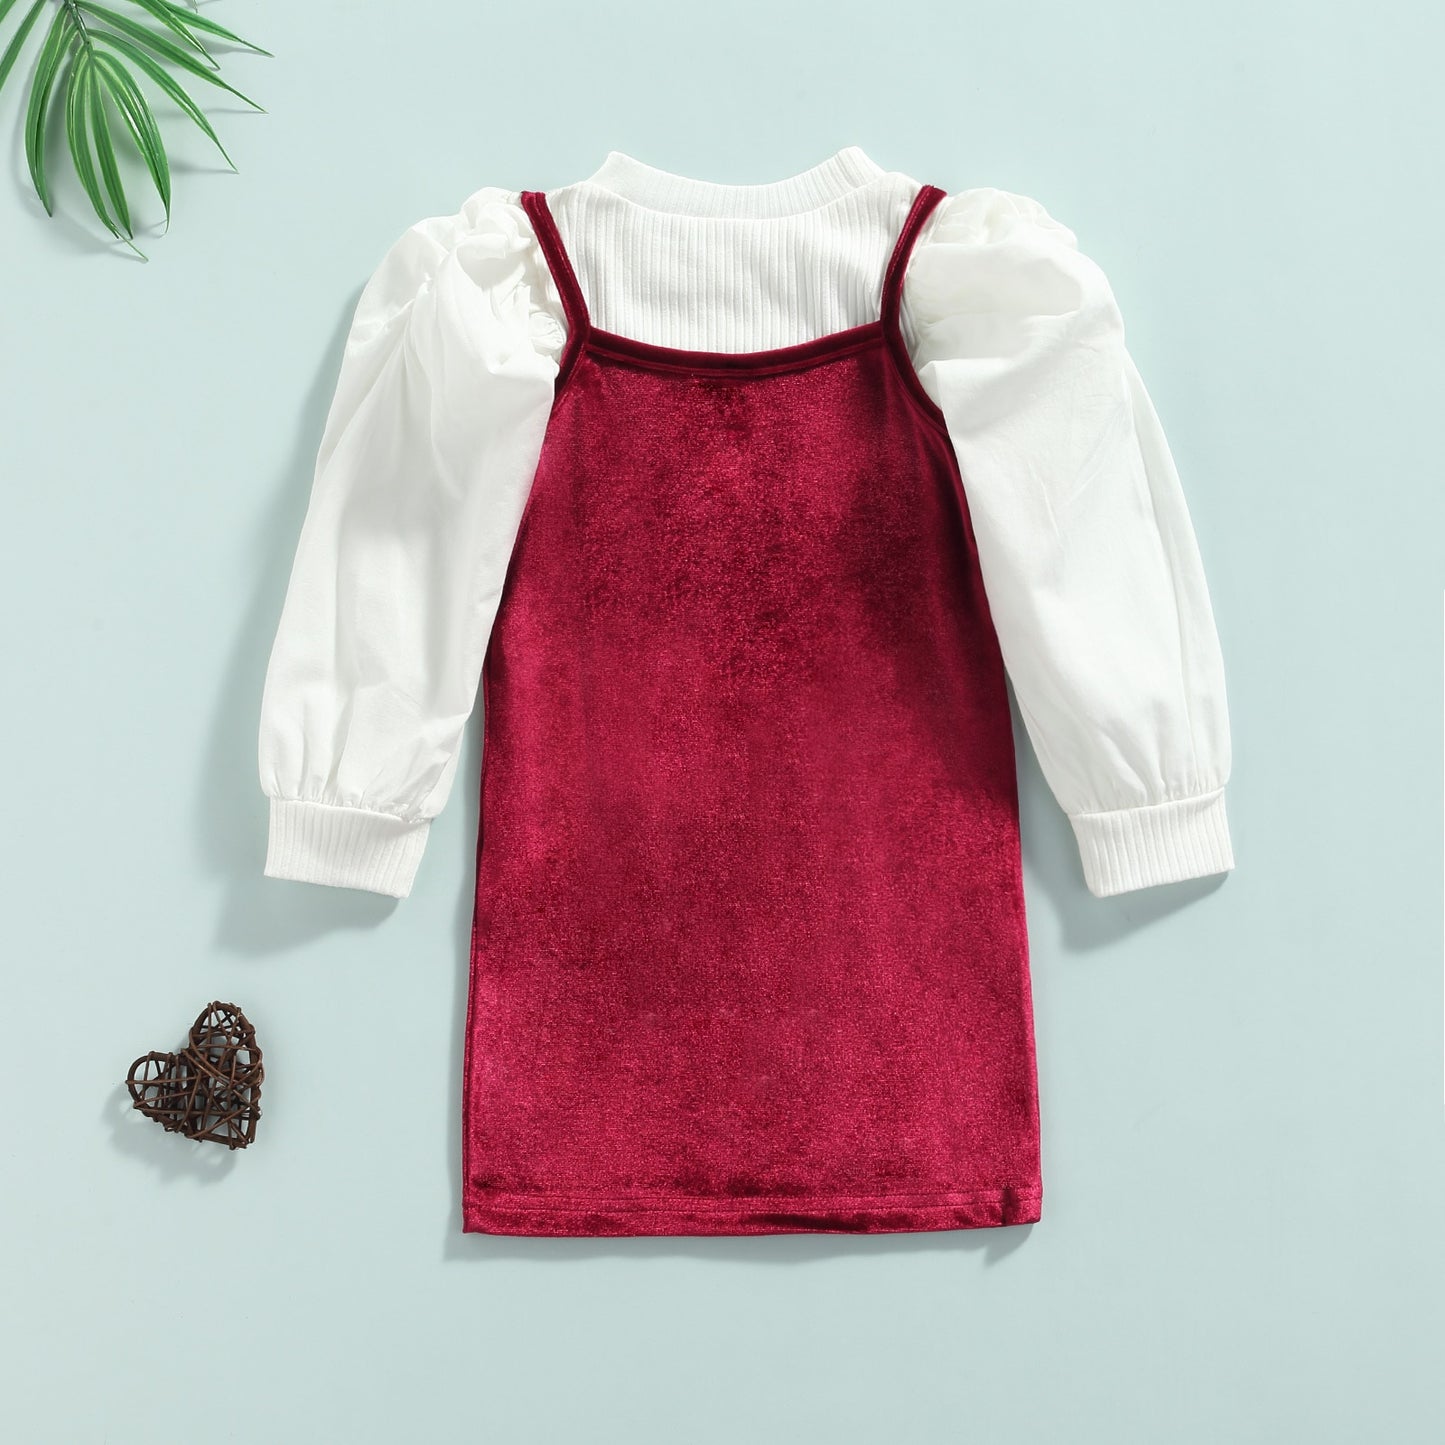 Classy Fashion Outfit Set - Sizes: 1 to 5 Years